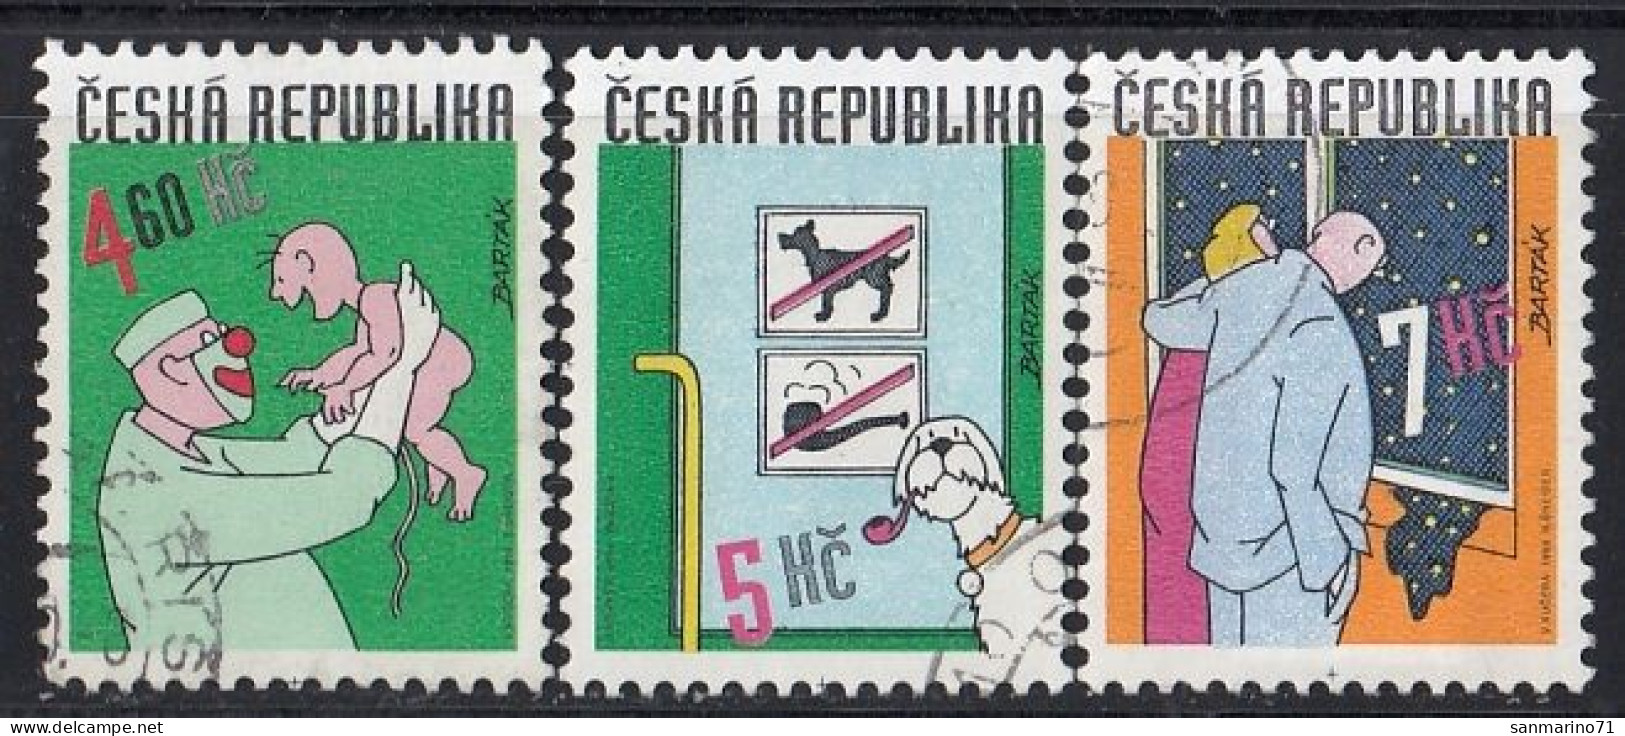 CZECH REPUBLIC 231-233,used,falc Hinged - Used Stamps